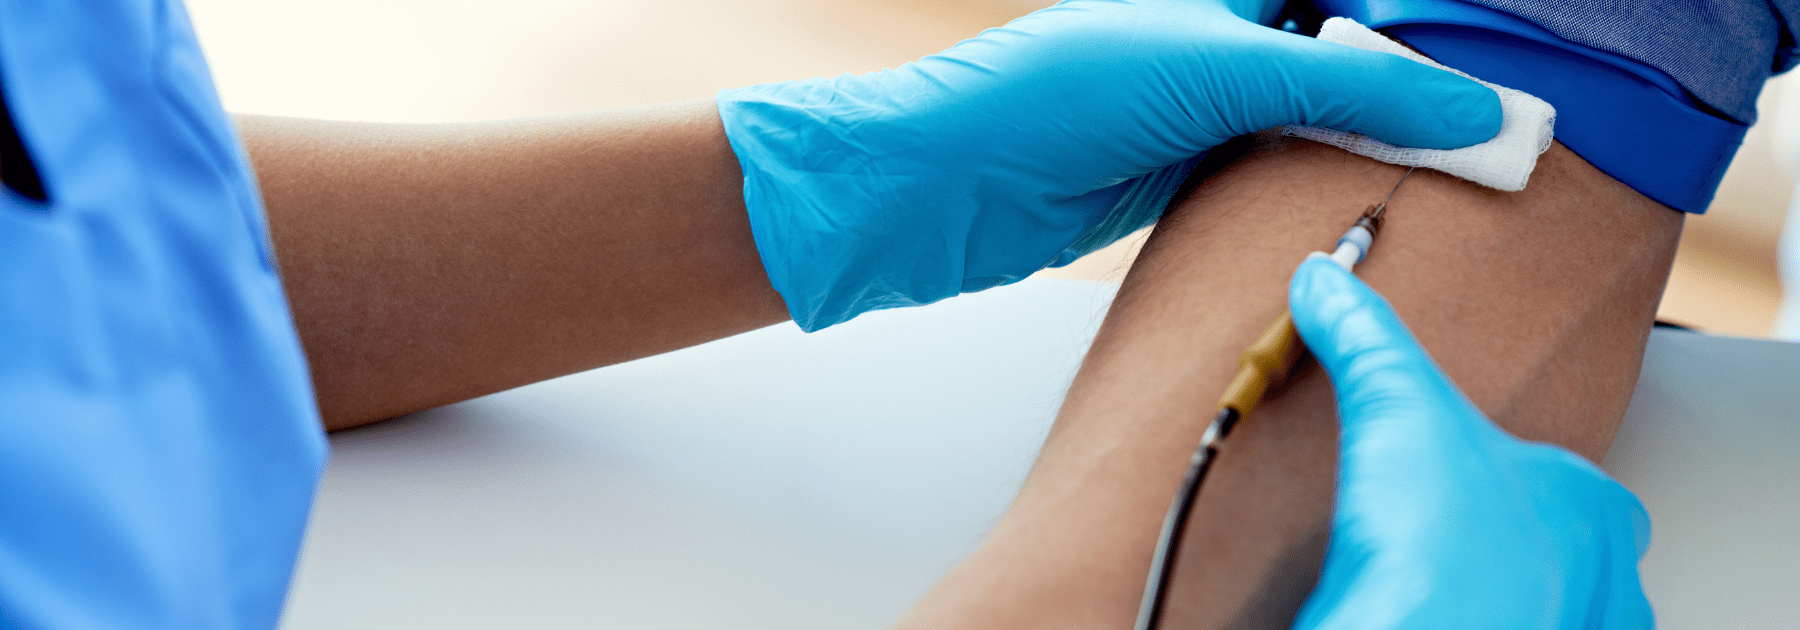 private blood tests manchester 